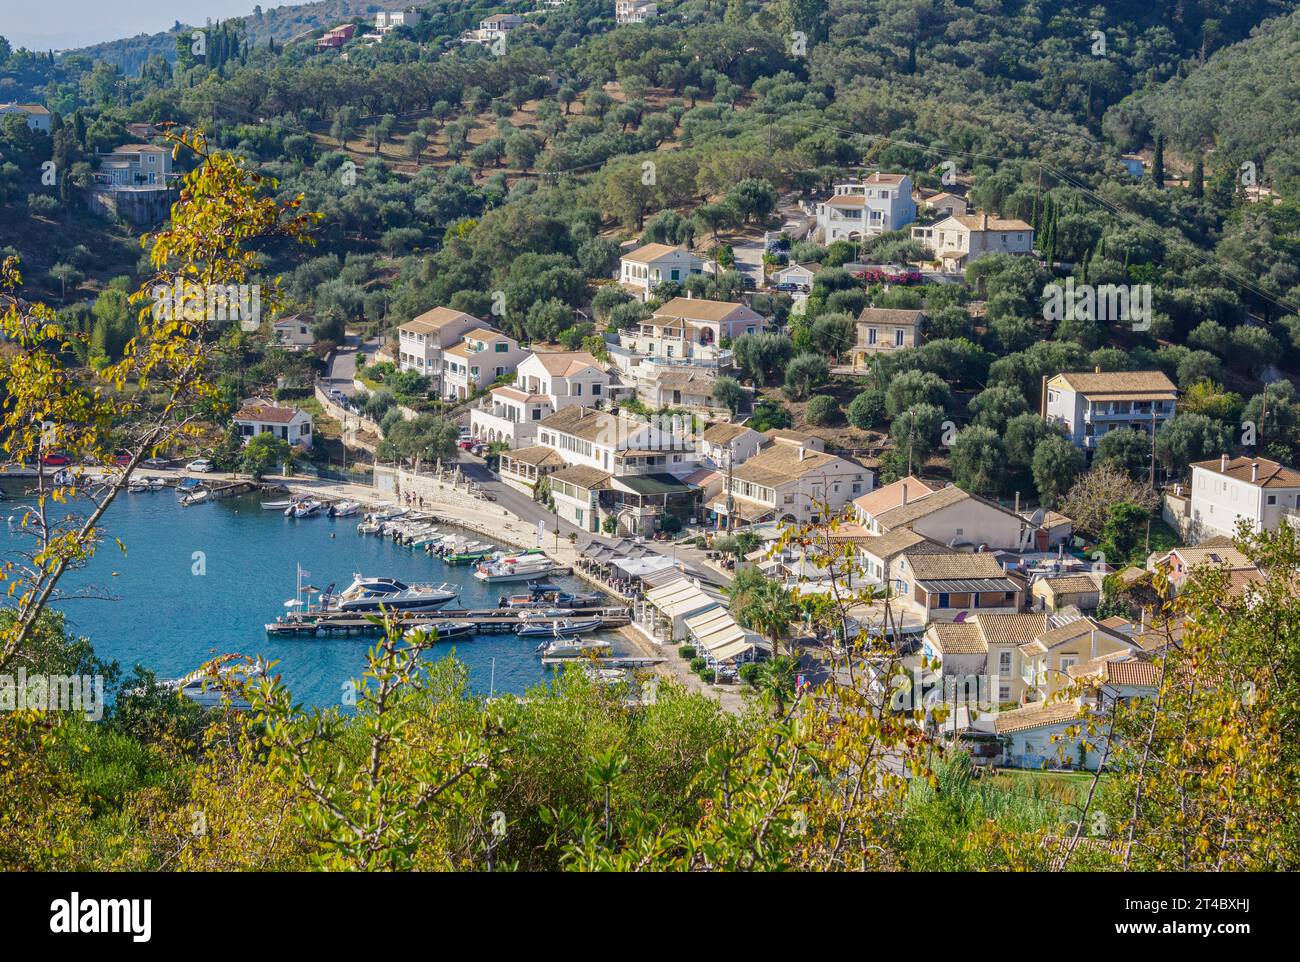 Looking down on the little fishing village of Agio Stefanos on the north-east coast of Corfu in the Ionian Islands of Greece Stock Photo